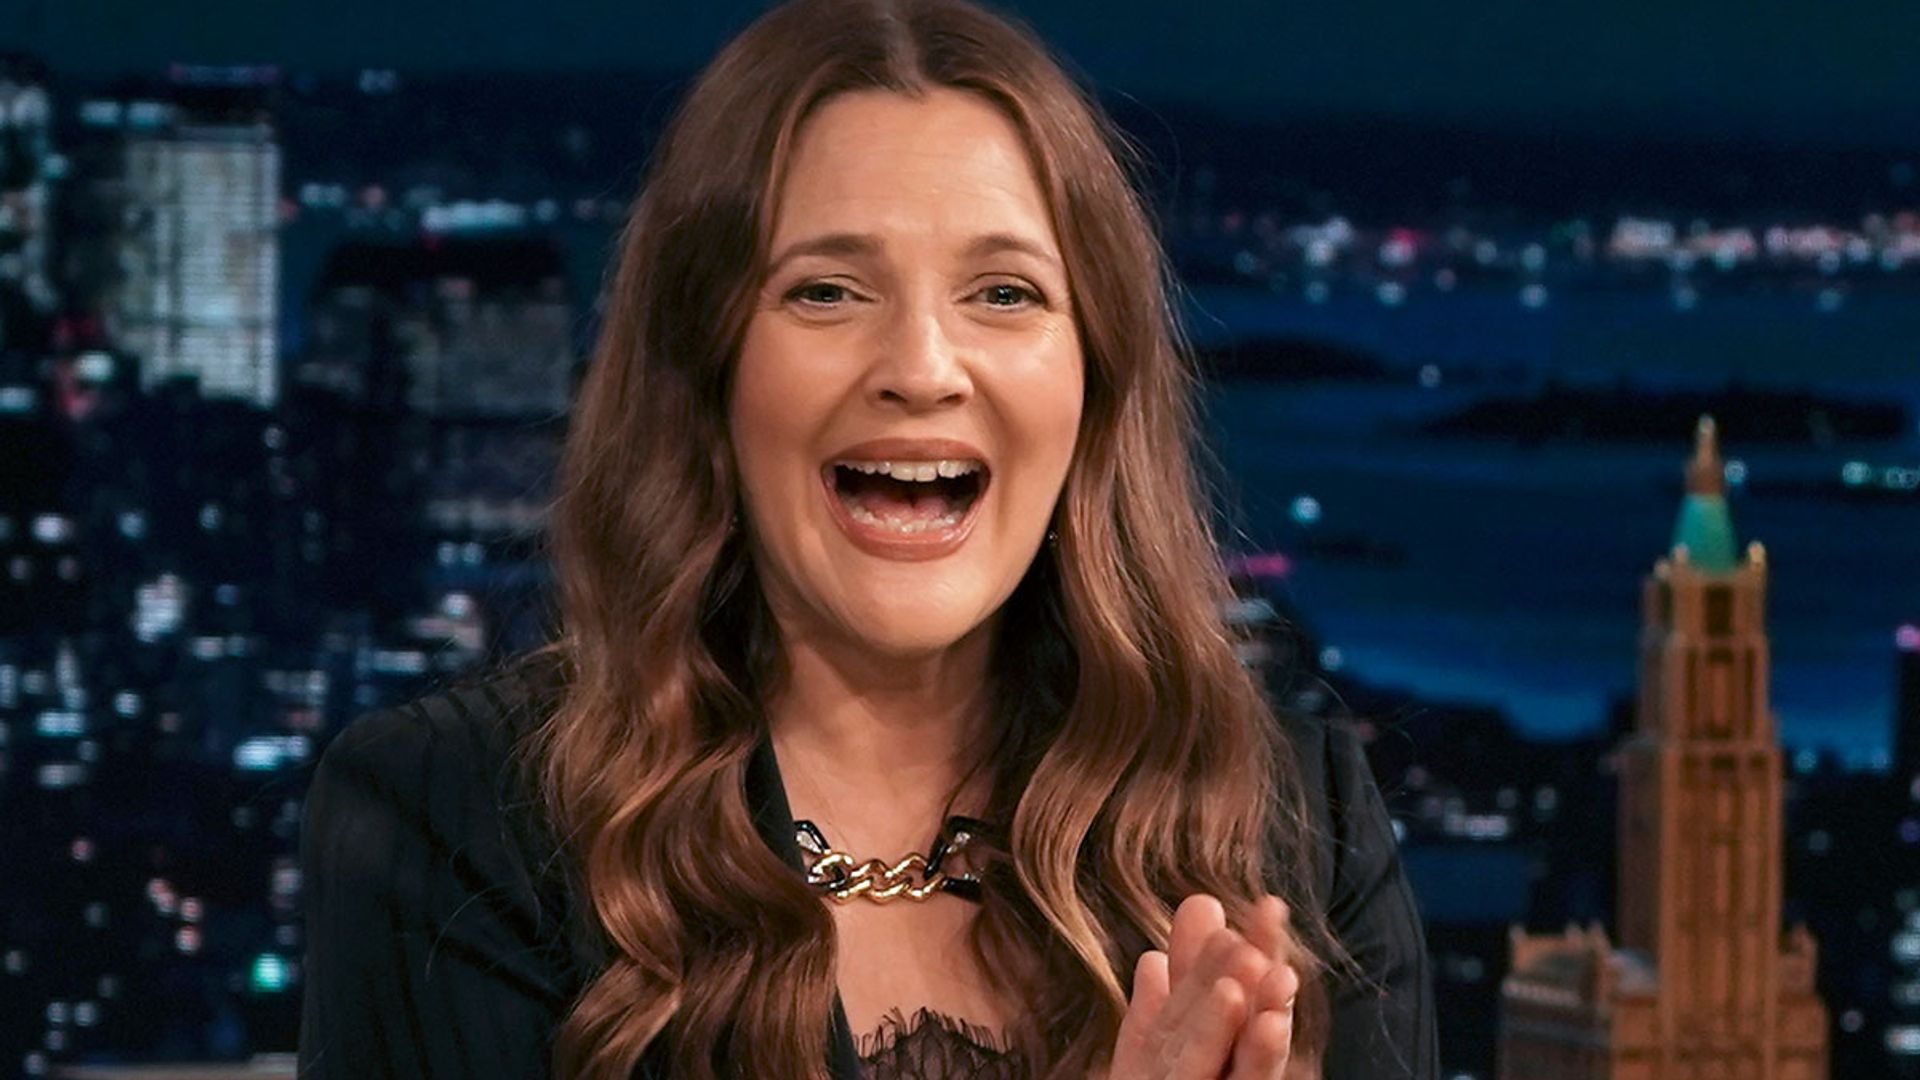 Drew Barrymore stuns fans with unexpected baby photo